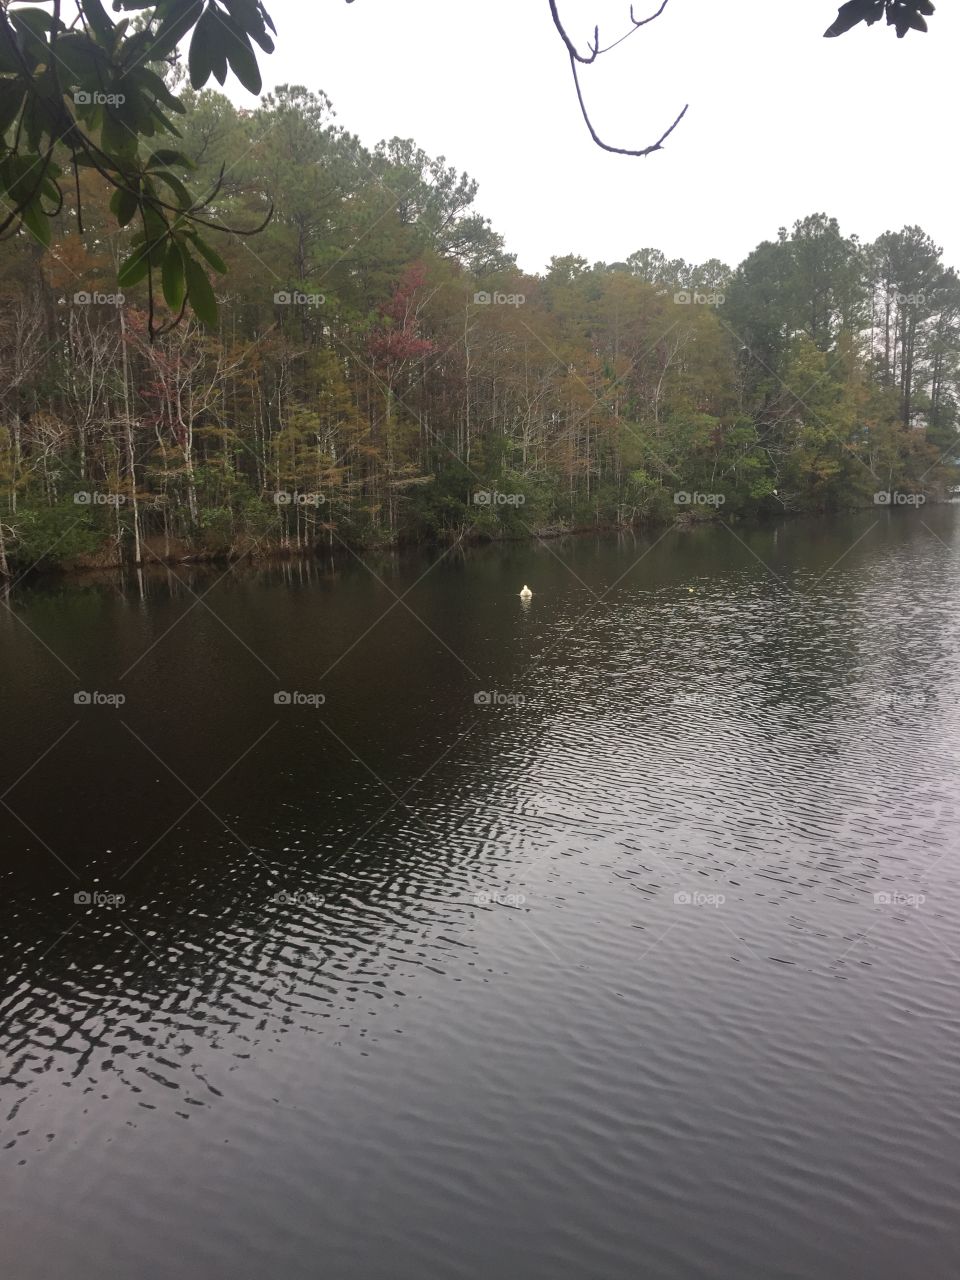 Beautiful nature at University of North Florida. It was a nice cold and cloudy day. Looked and felt great!